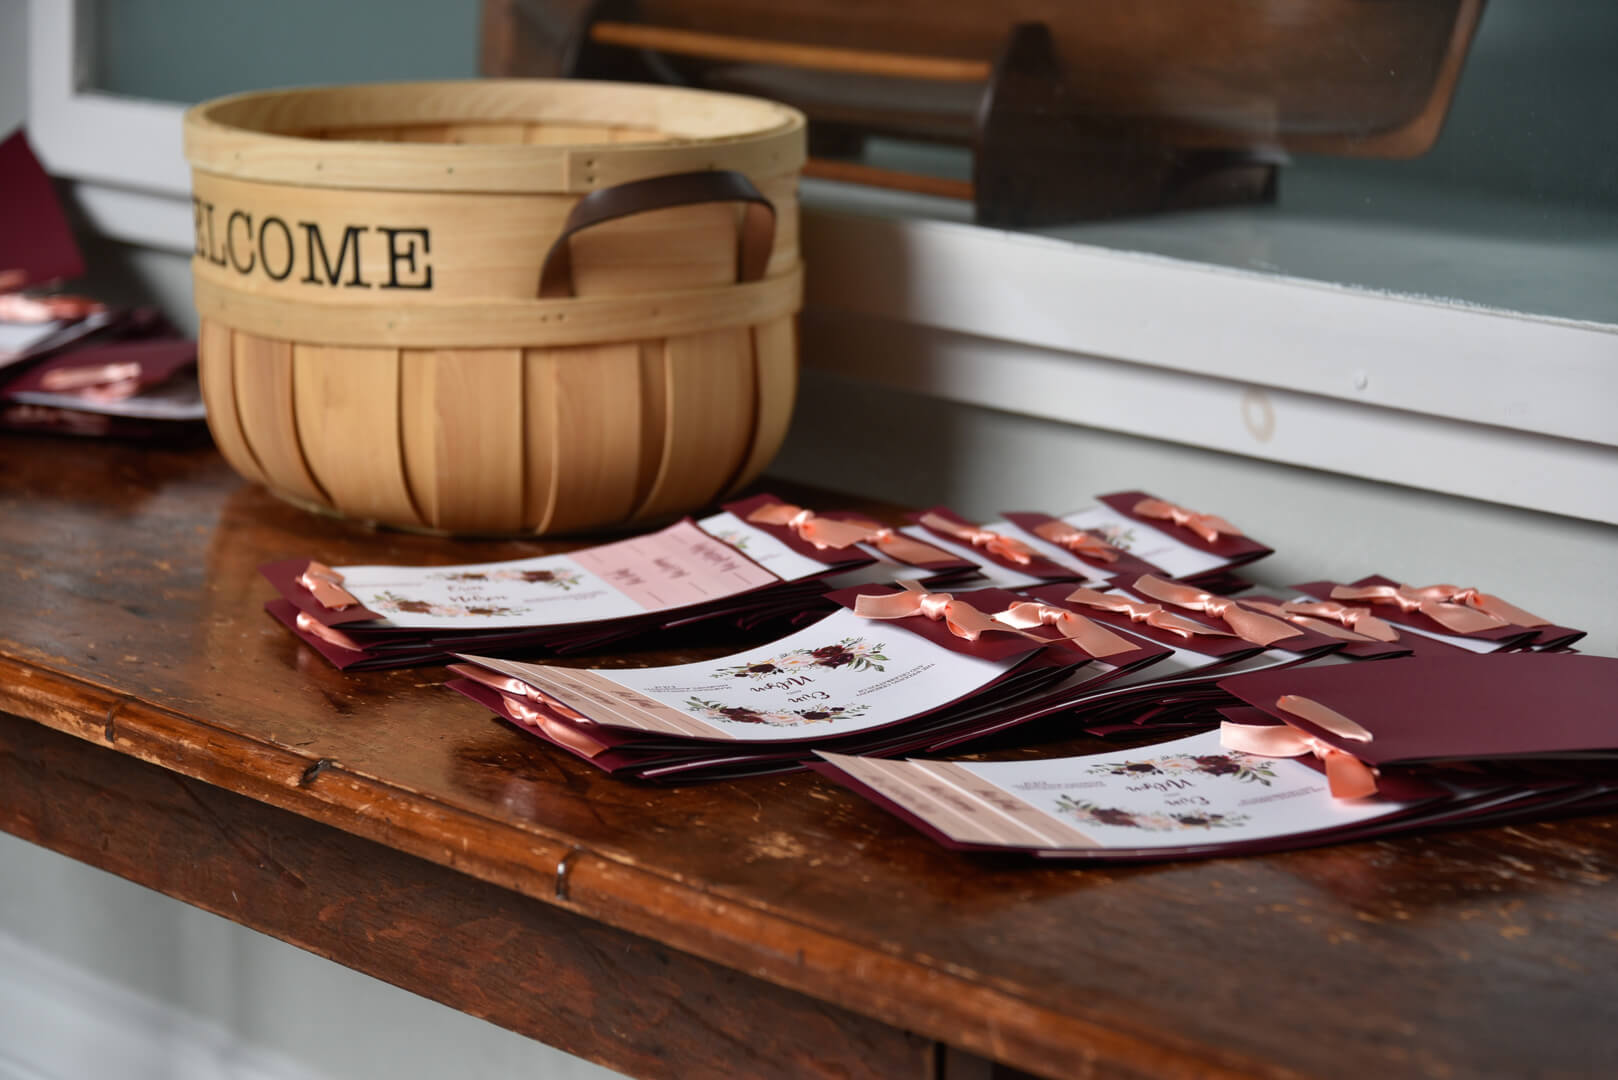 Event cards and basket with welcome text on a table